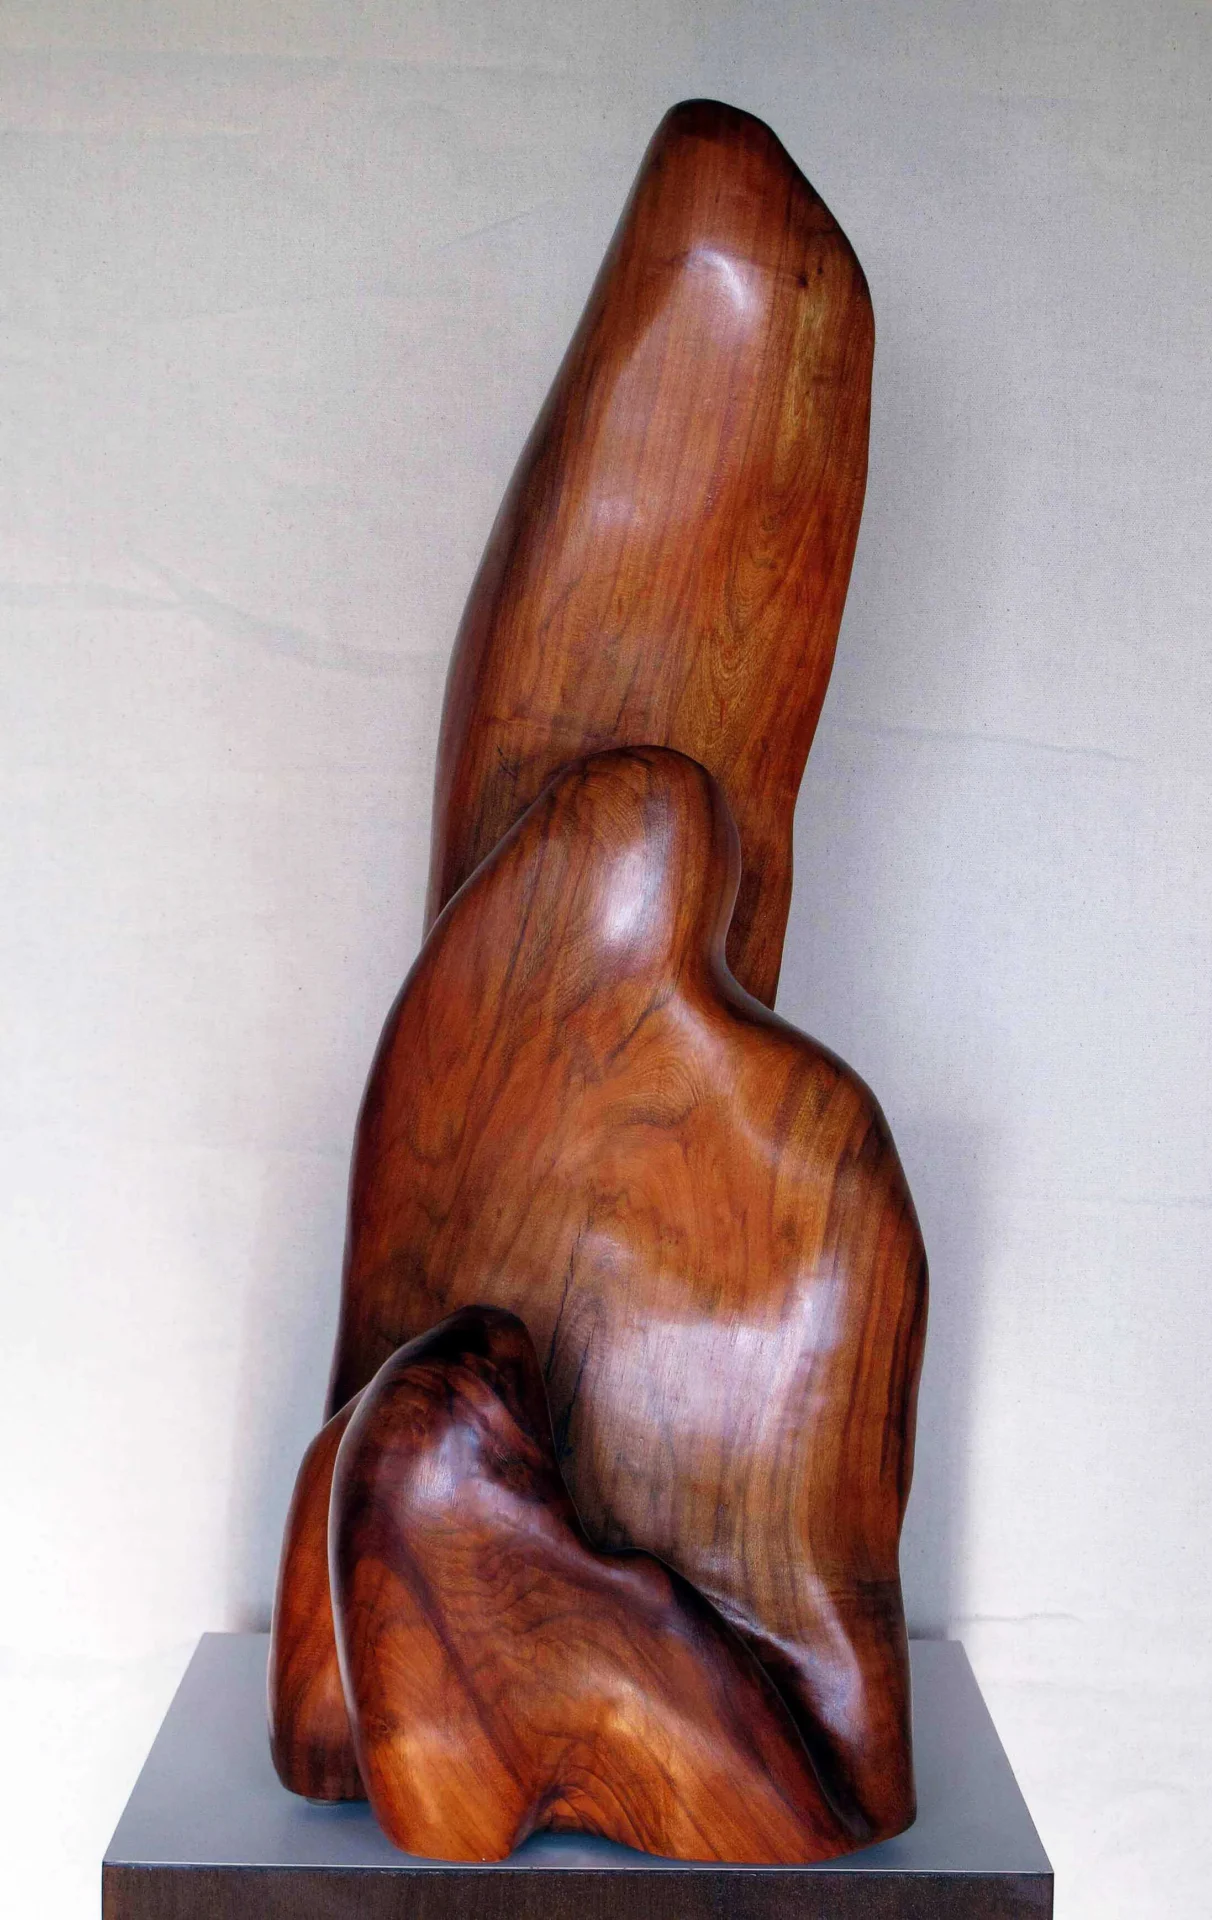 A wooden sculpture of a person 's head and arm.